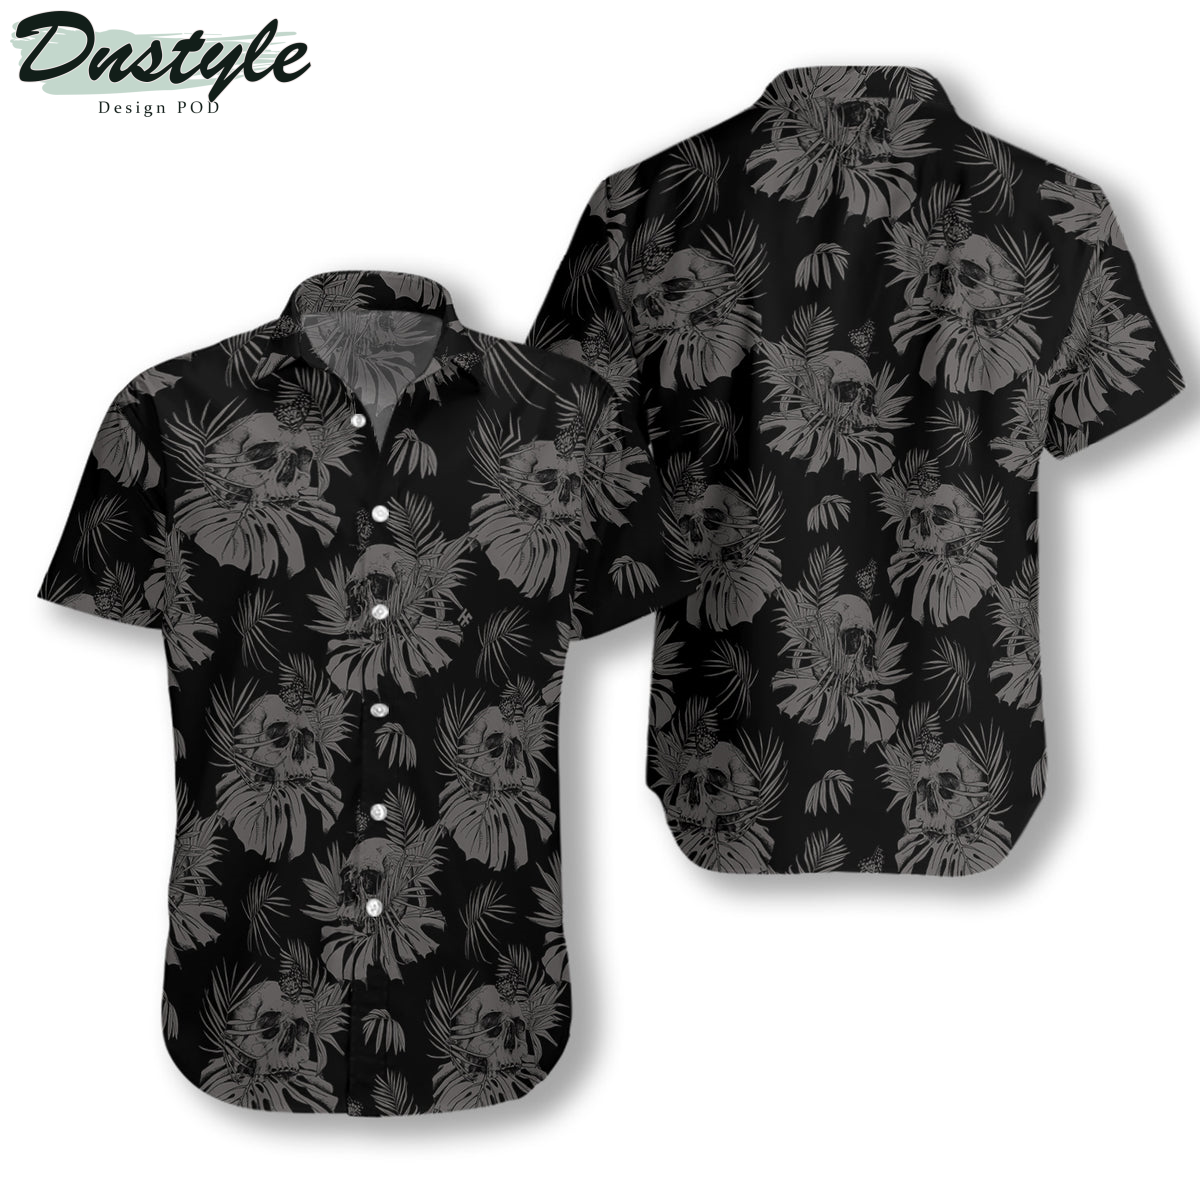 Seamless Gothic Skull With Butterfly Goth Black Tropical Hawaiian Shirt